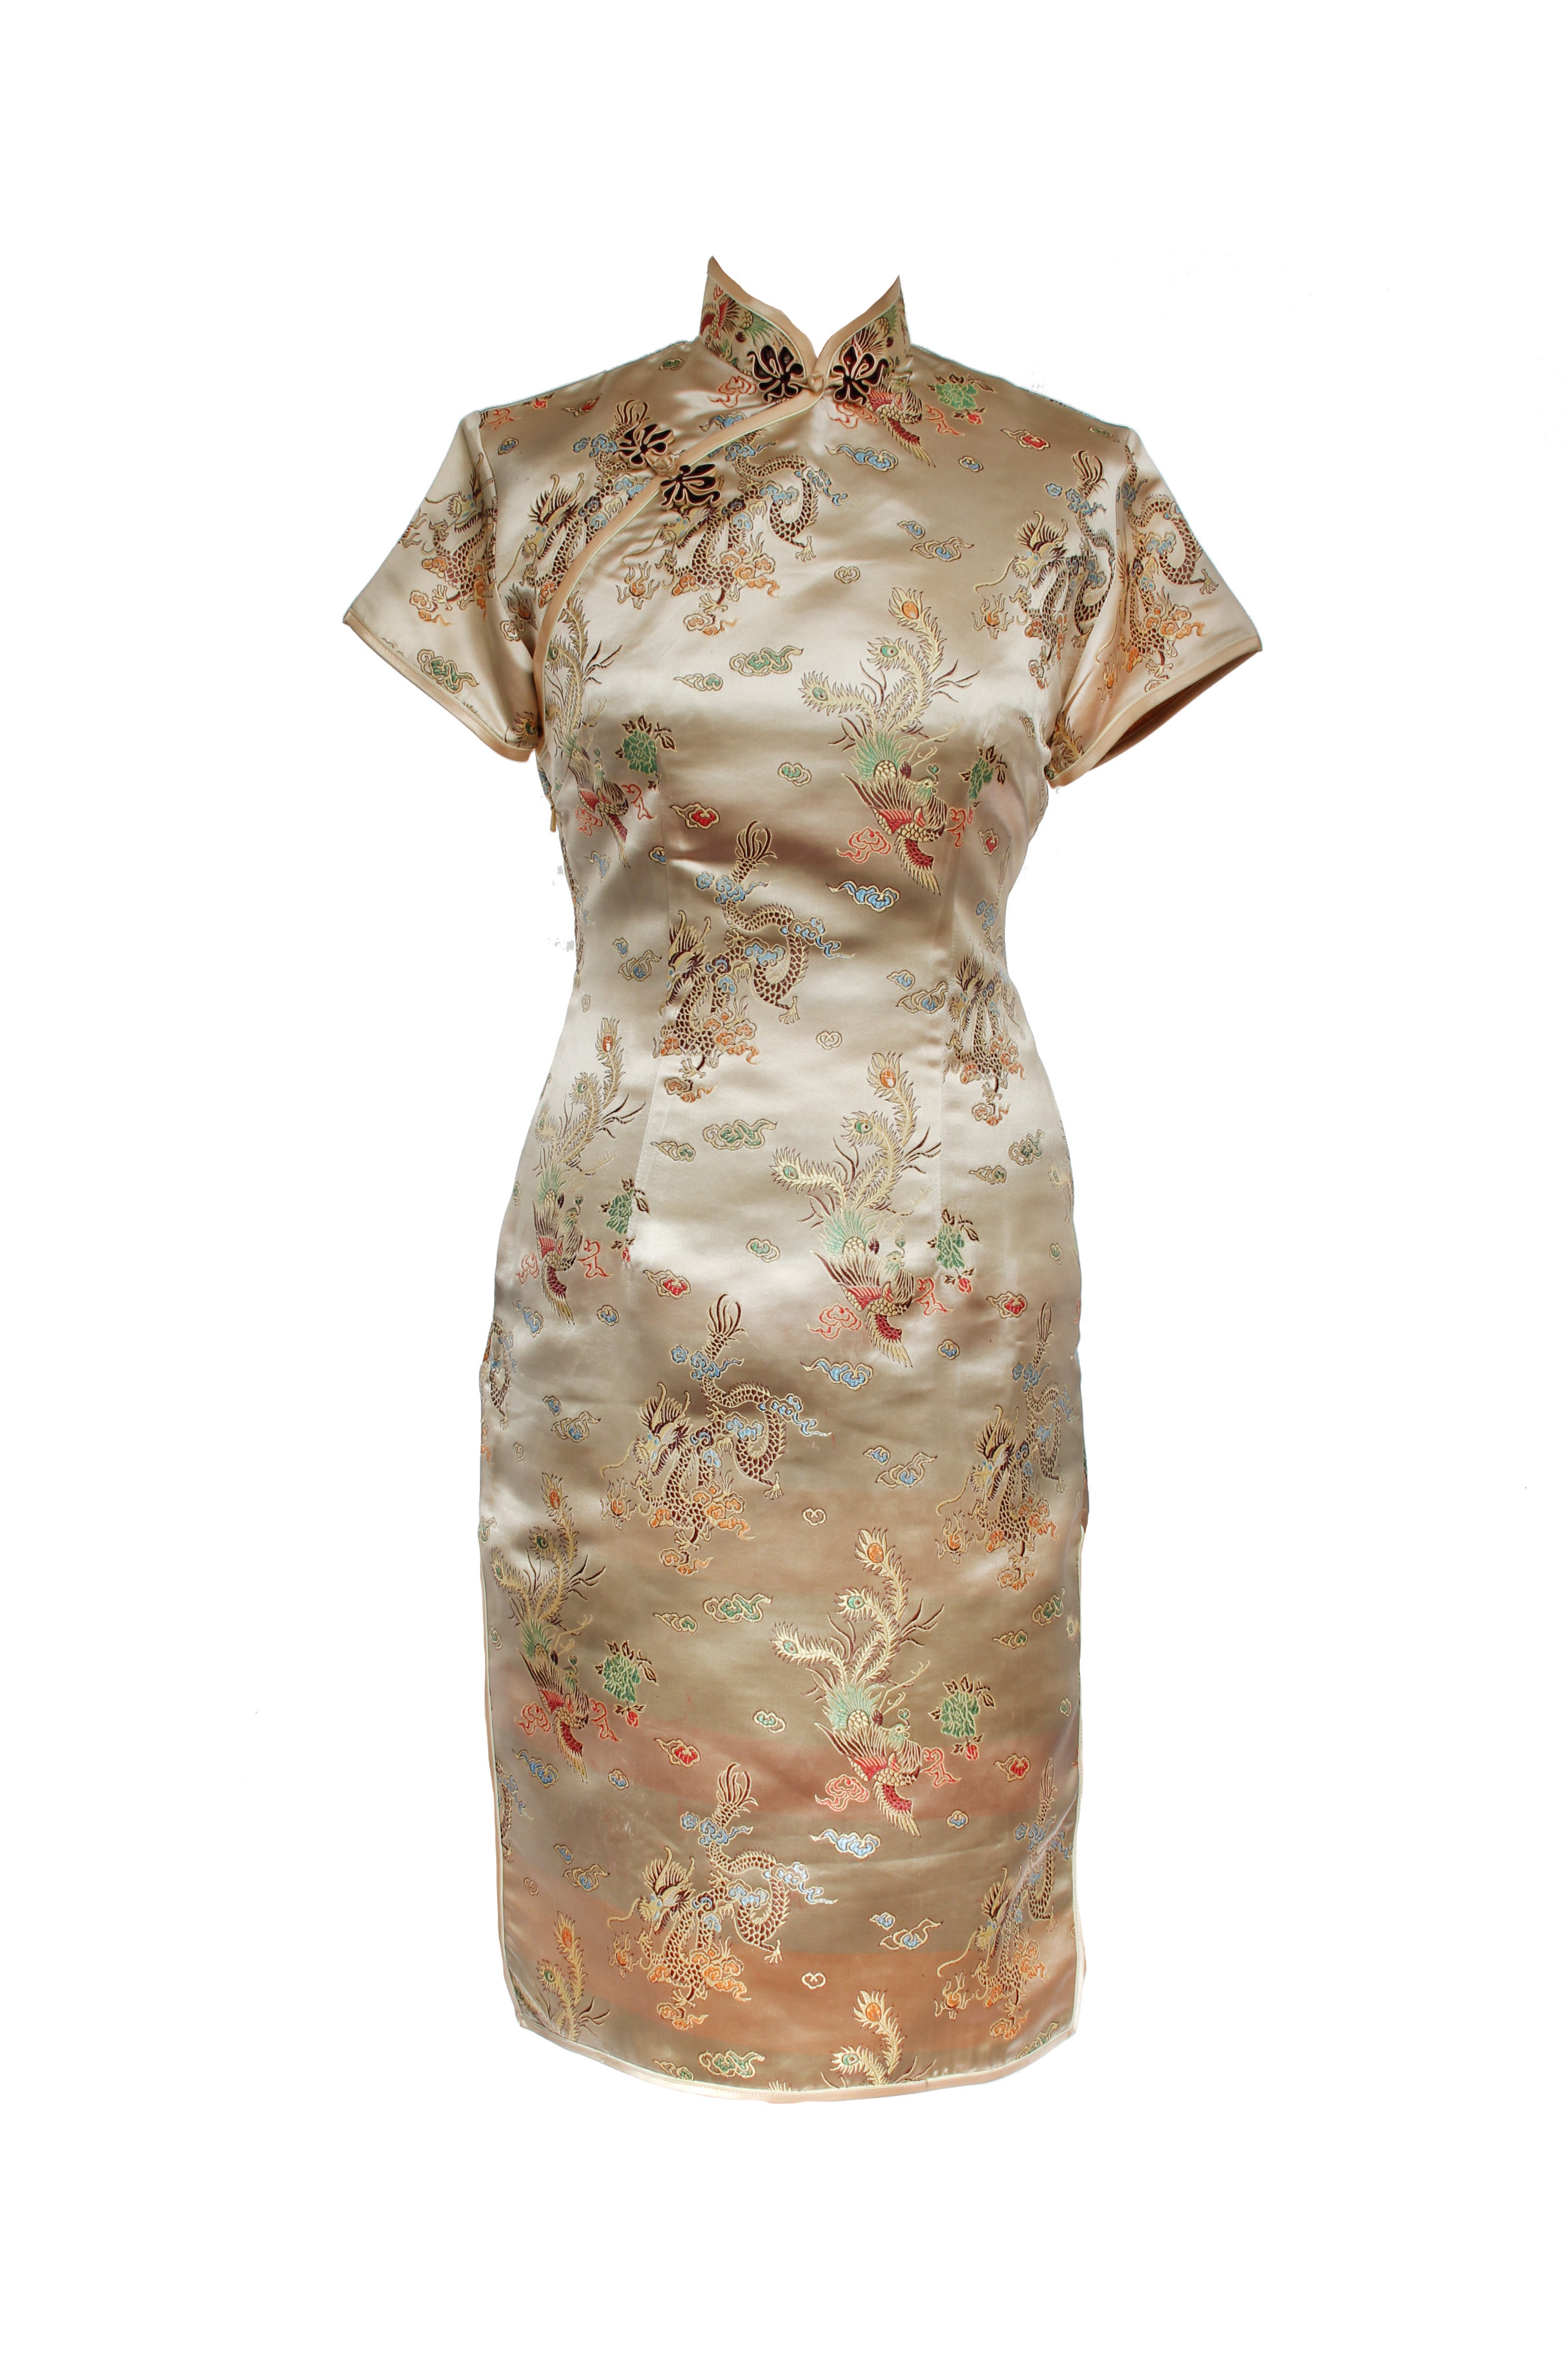 The Cheongsam or Qipao, is a feminine body-hugging dress with distinctive Chinese features of mandarin collar, side splits and hand stitched flower and knot frog fastenings. Manufactured in authentic high quality silk/rayon brocade in a classic gold dragon and phoenix design - a symbol success and prosperity